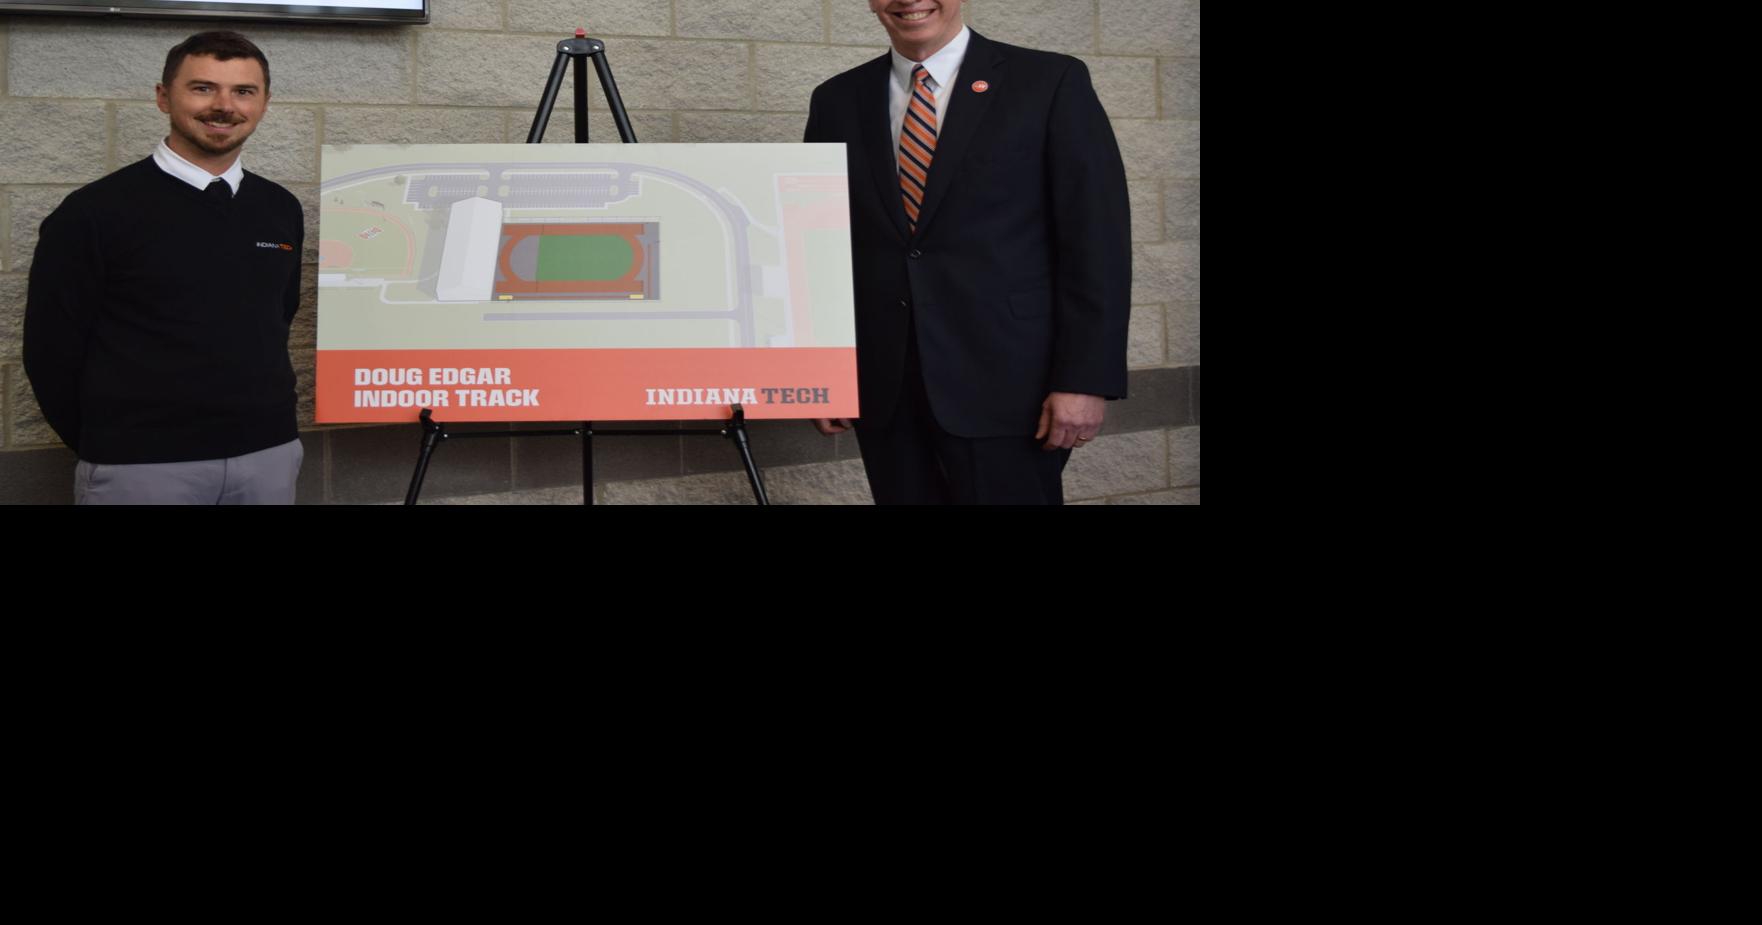 Oct. 28 - Indiana Tech breaks ground for Doug Edgar Indoor Track, named for  coach, Fwbusiness